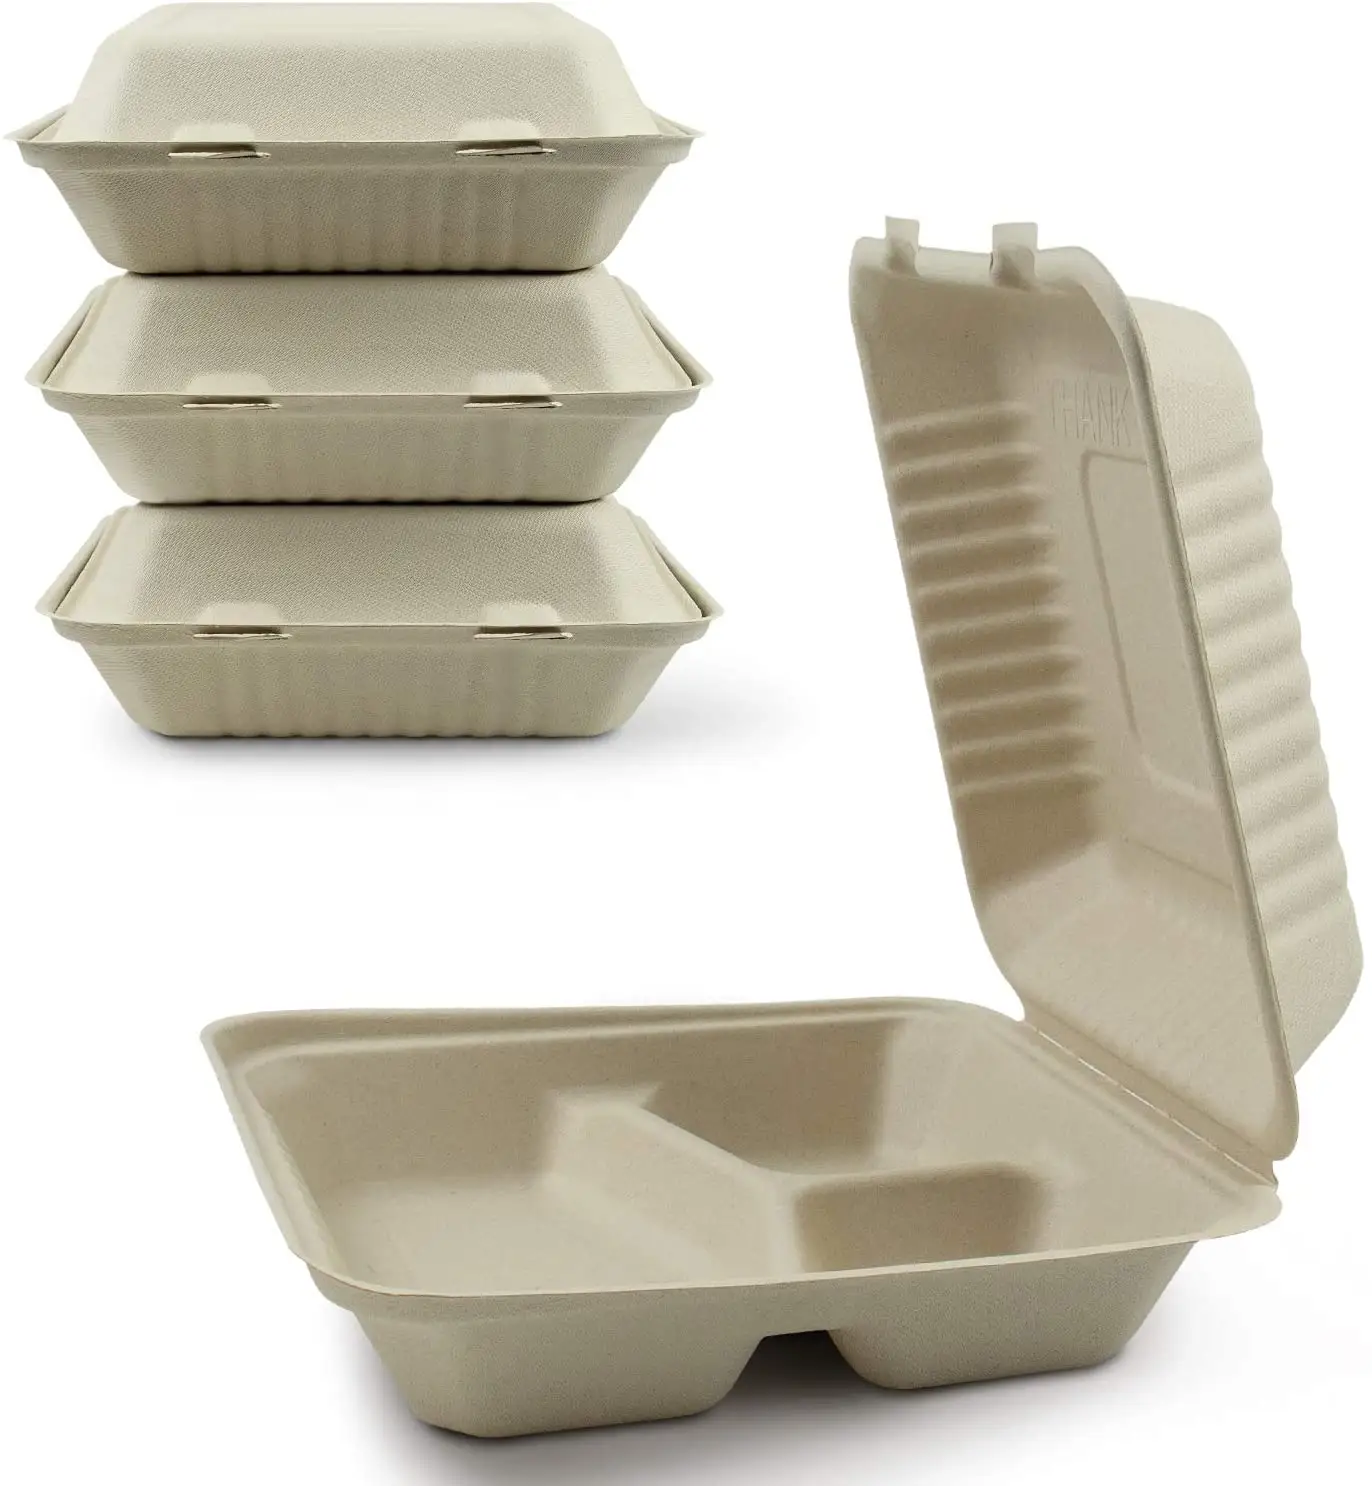 WPACK Biodegradable Disposable Sugarcane Sugar Cane Bagasse Food Fiber Takeout Food Containers Packaging